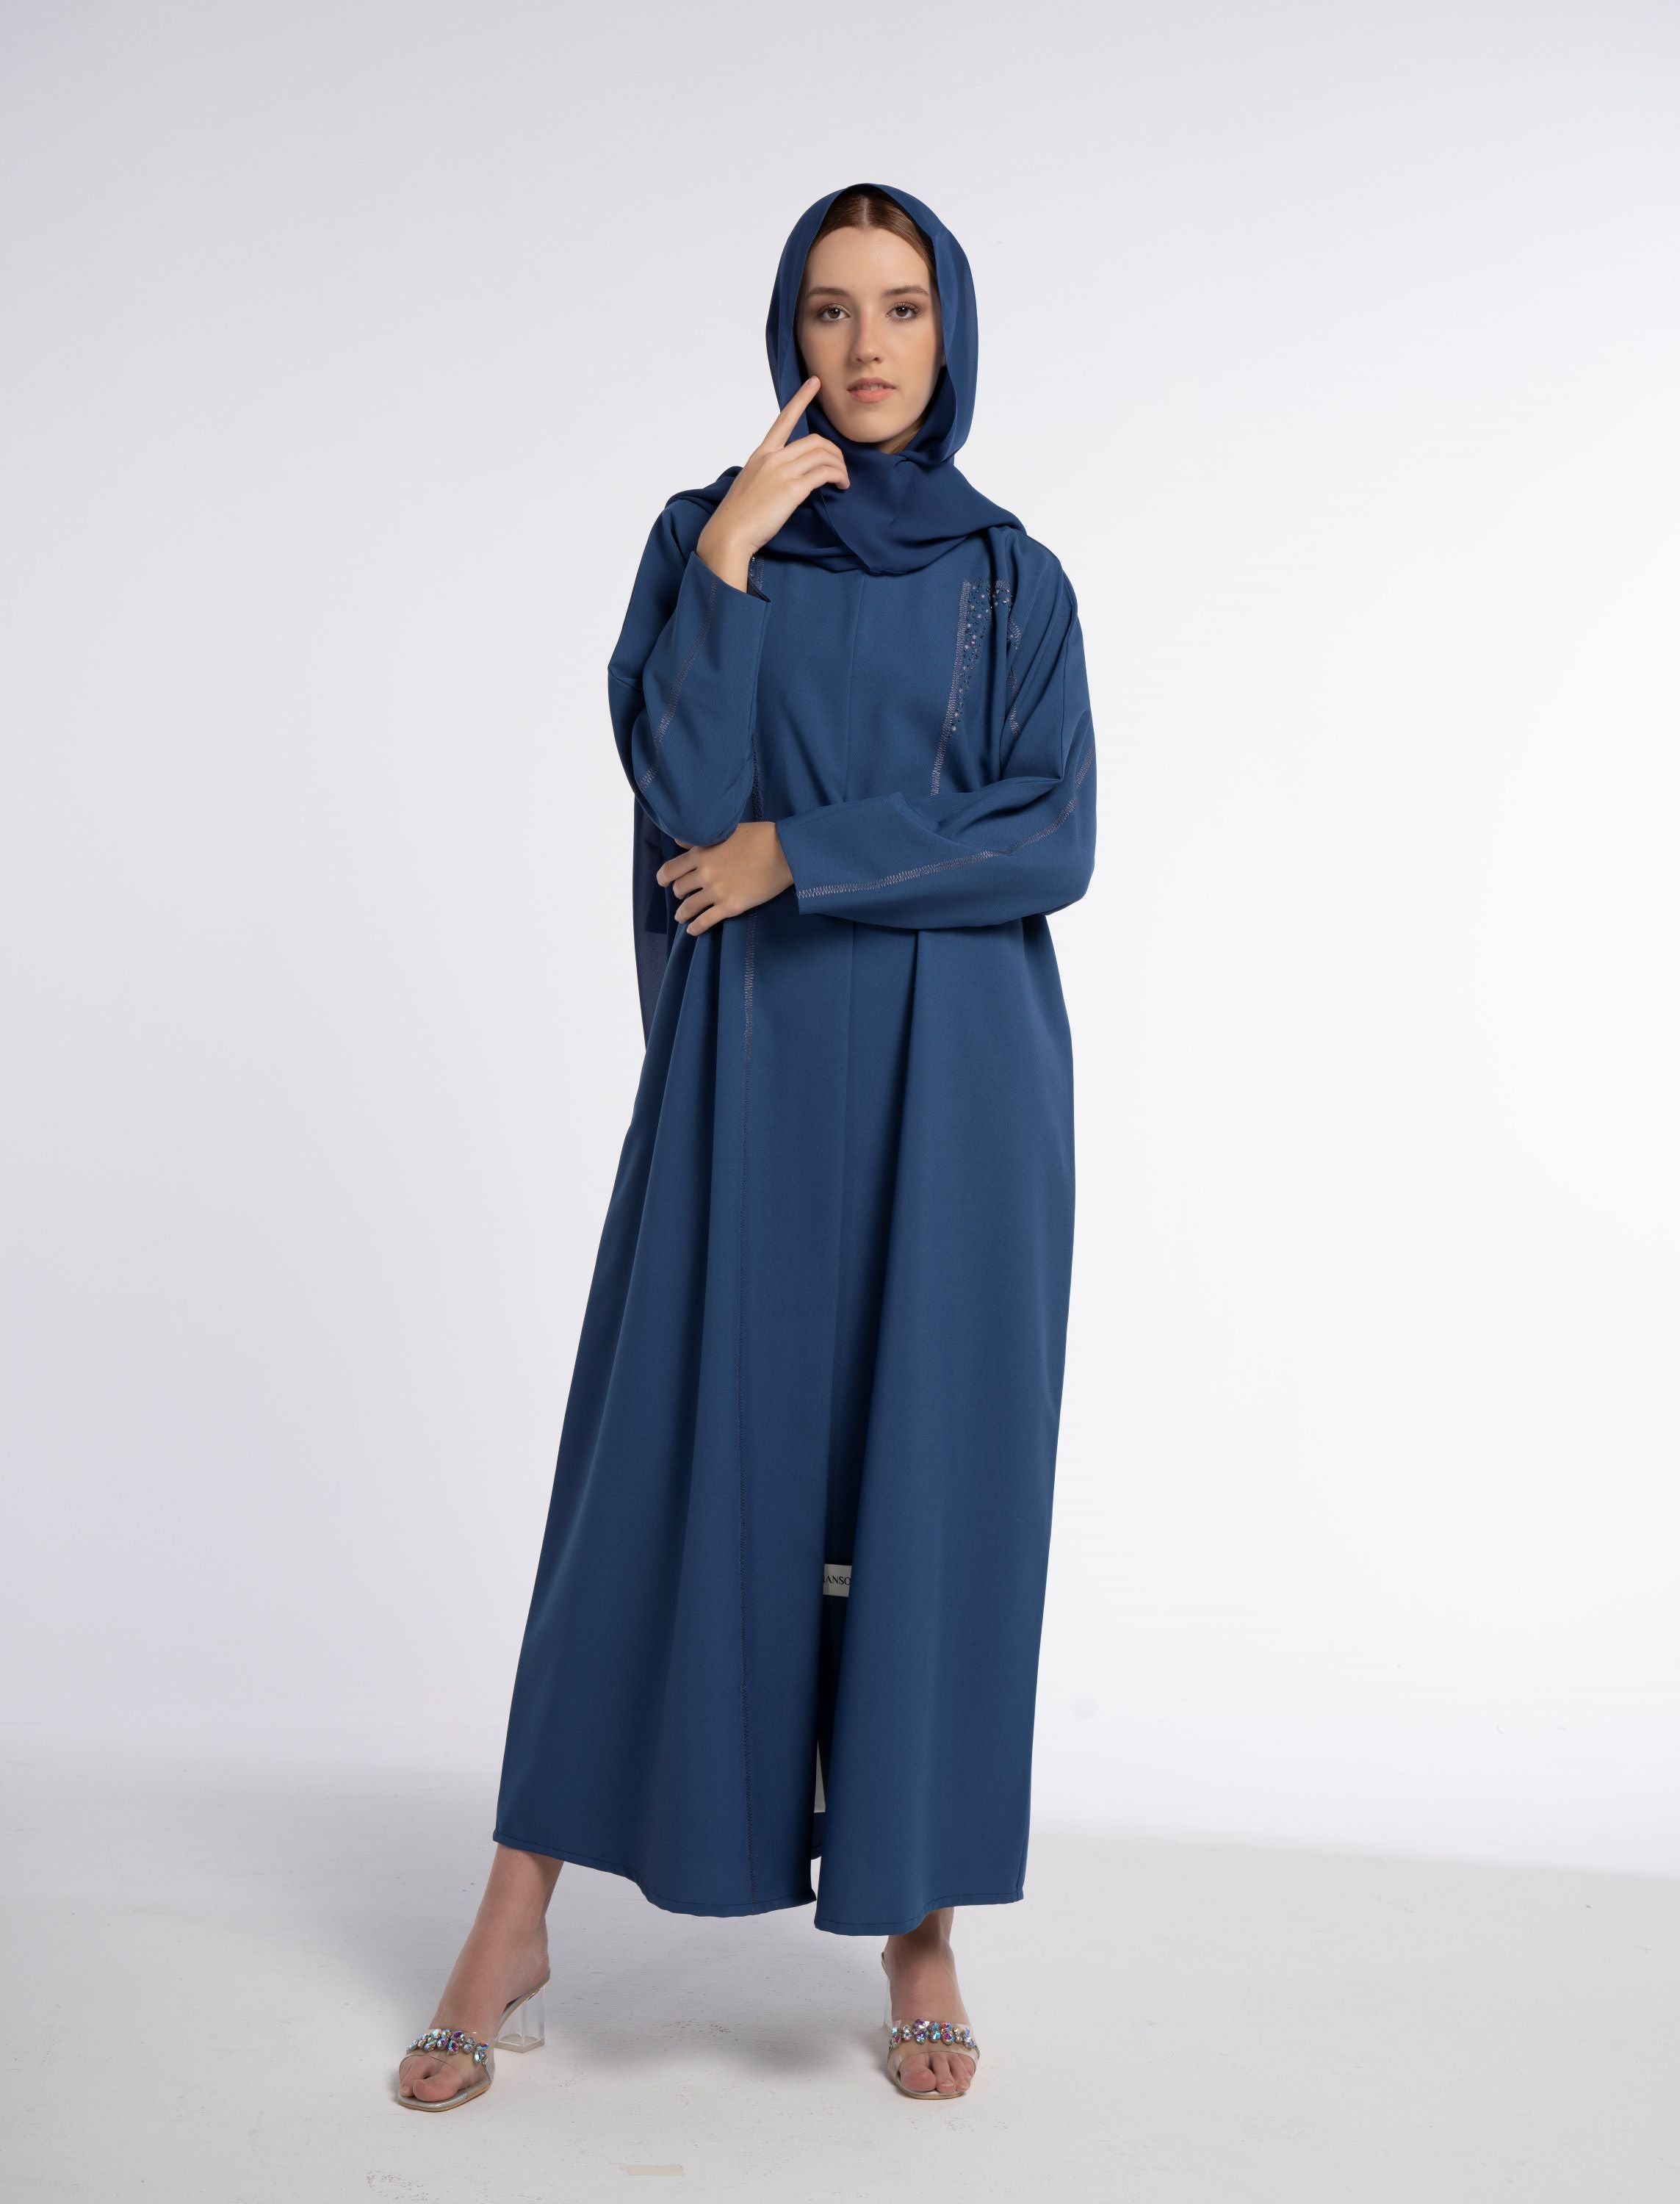 Sky Blue Colored V-Neck Abaya with Geometrical Patterned Embroidery ...